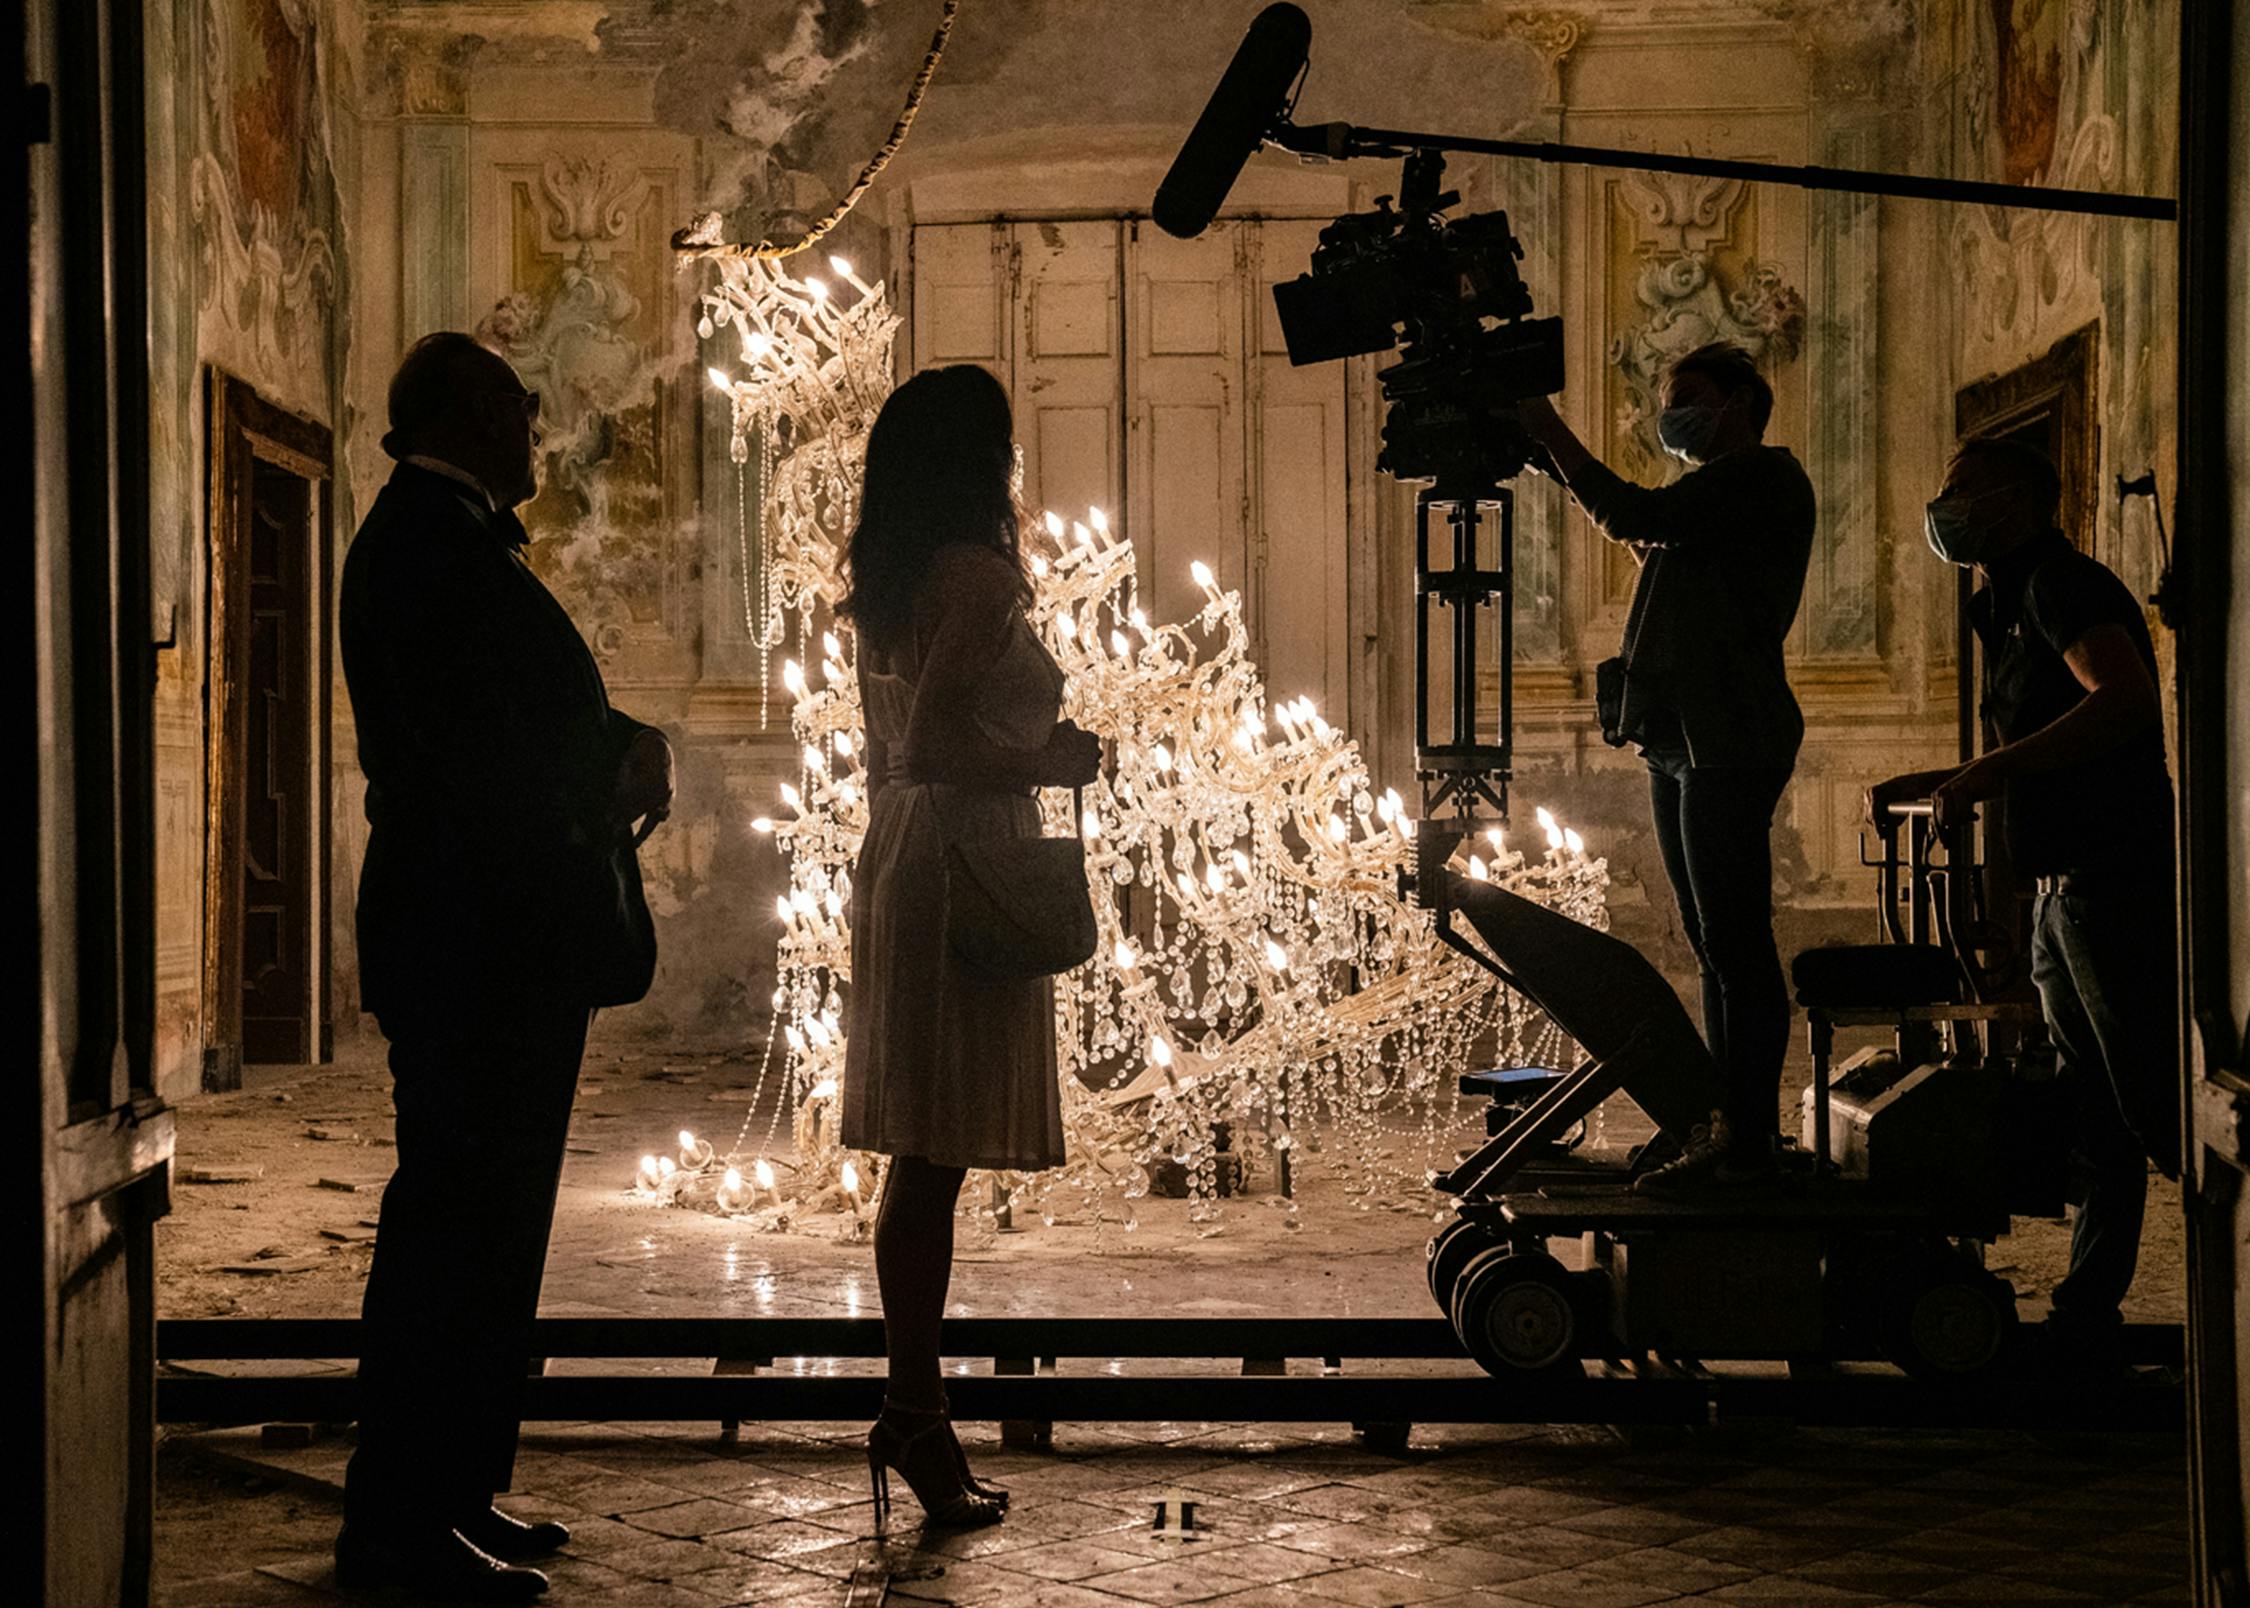 The shadowy figures of the cast and crew of The Hand of God stand beside a fallen chandelier. On the walls is ornate antique molding. 